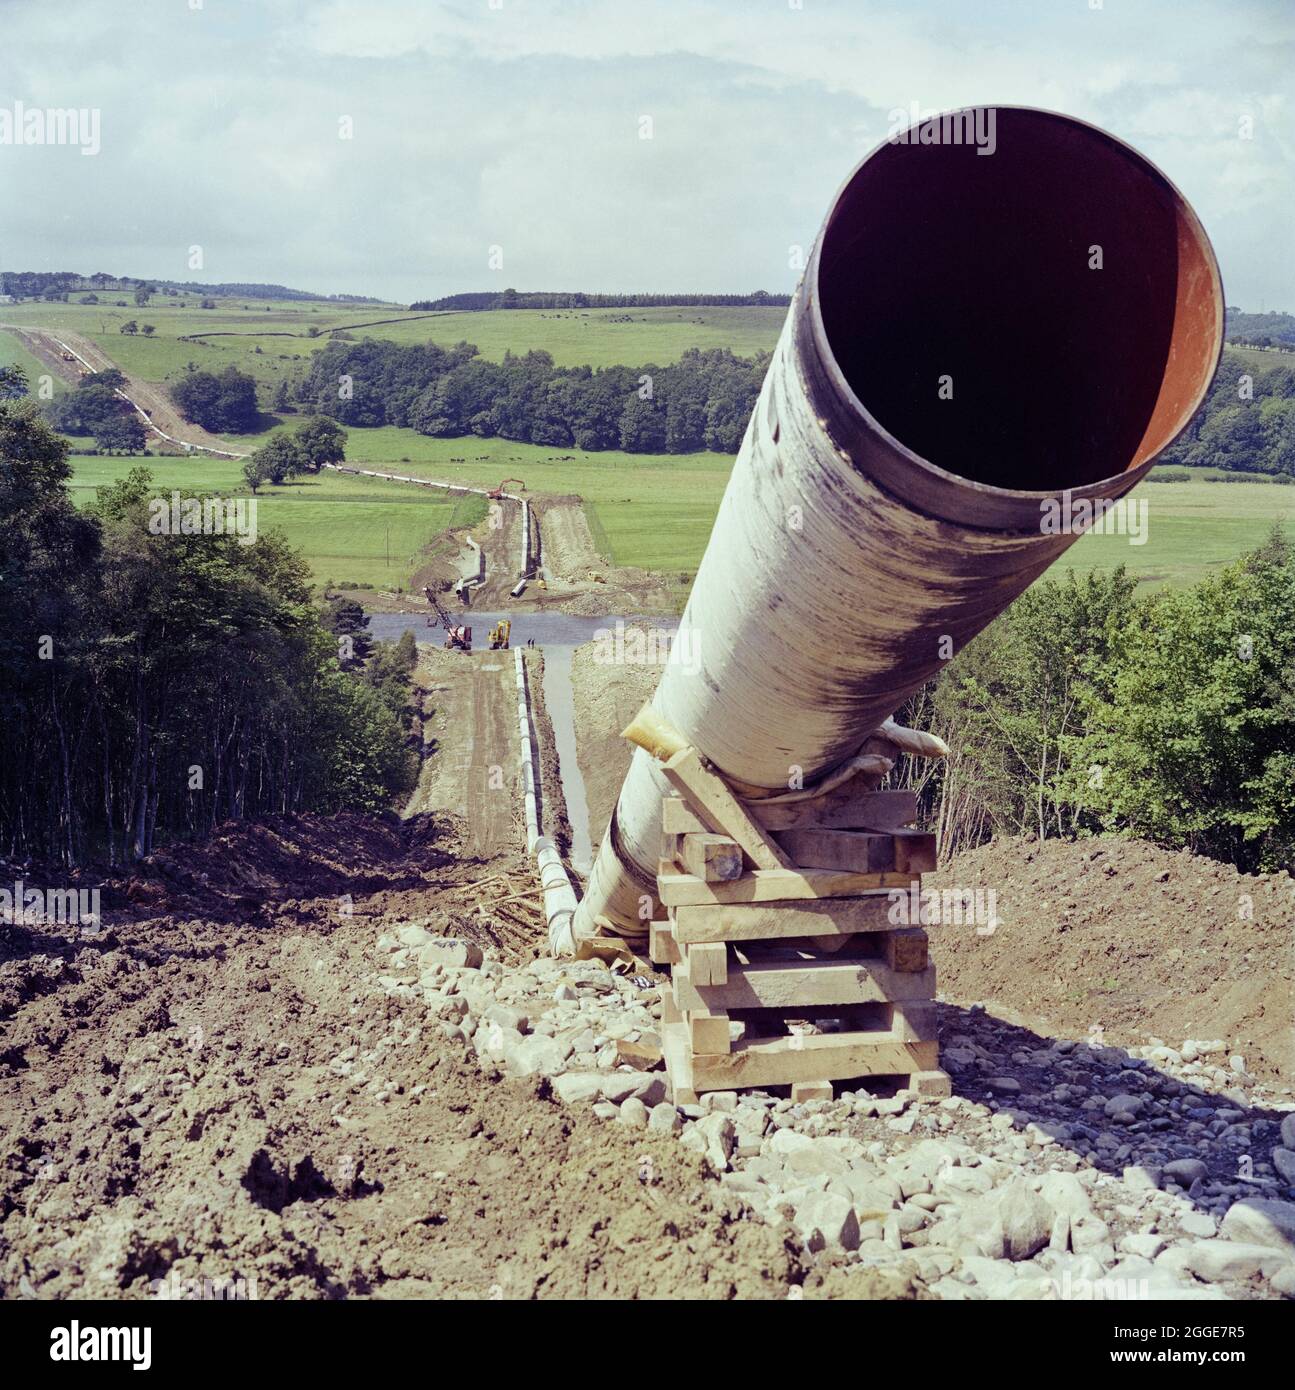 A view along the route of the Brampton pipeline, showing the pipe at a 45 degree angle in the foreground, where it meets a slope. In 1975, Laing Pipelines laid the Brampton gas pipeline between Longtown near Carlisle to the east of Bishop Auckland. The pipeline is a section of the Frigg pipeline carrying natural gas from the North Sea to near Peterhead in Scotland. The headquarters for the Laing contract was located at an old quarry near Brampton. Stock Photo